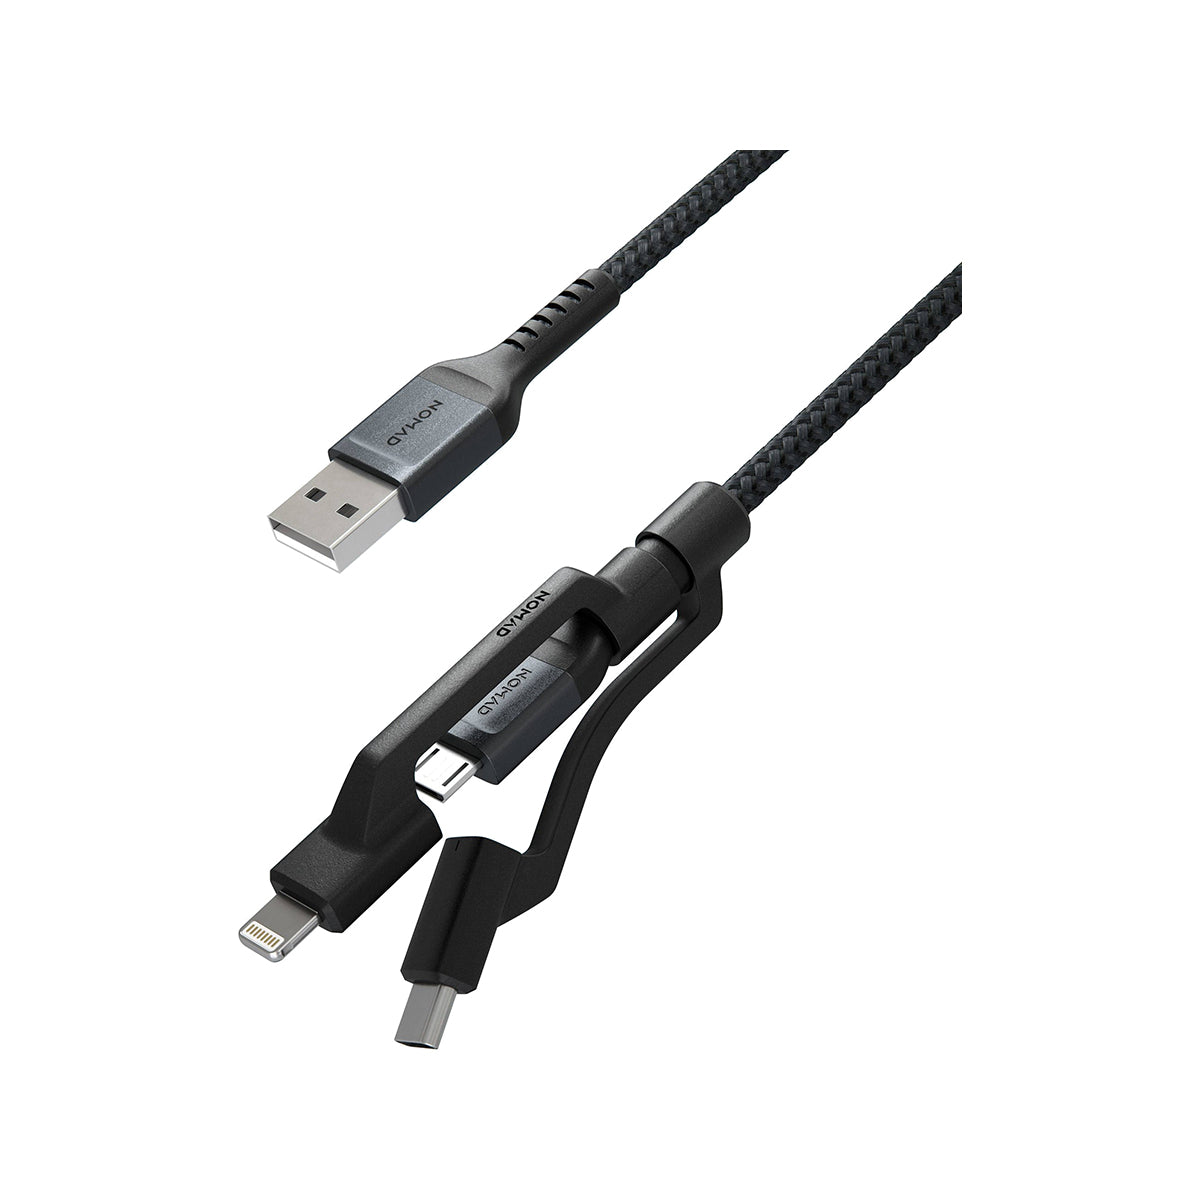 NOMAD Kevlar Universal Cable USB A V2 - 1.5M For A Type Charger